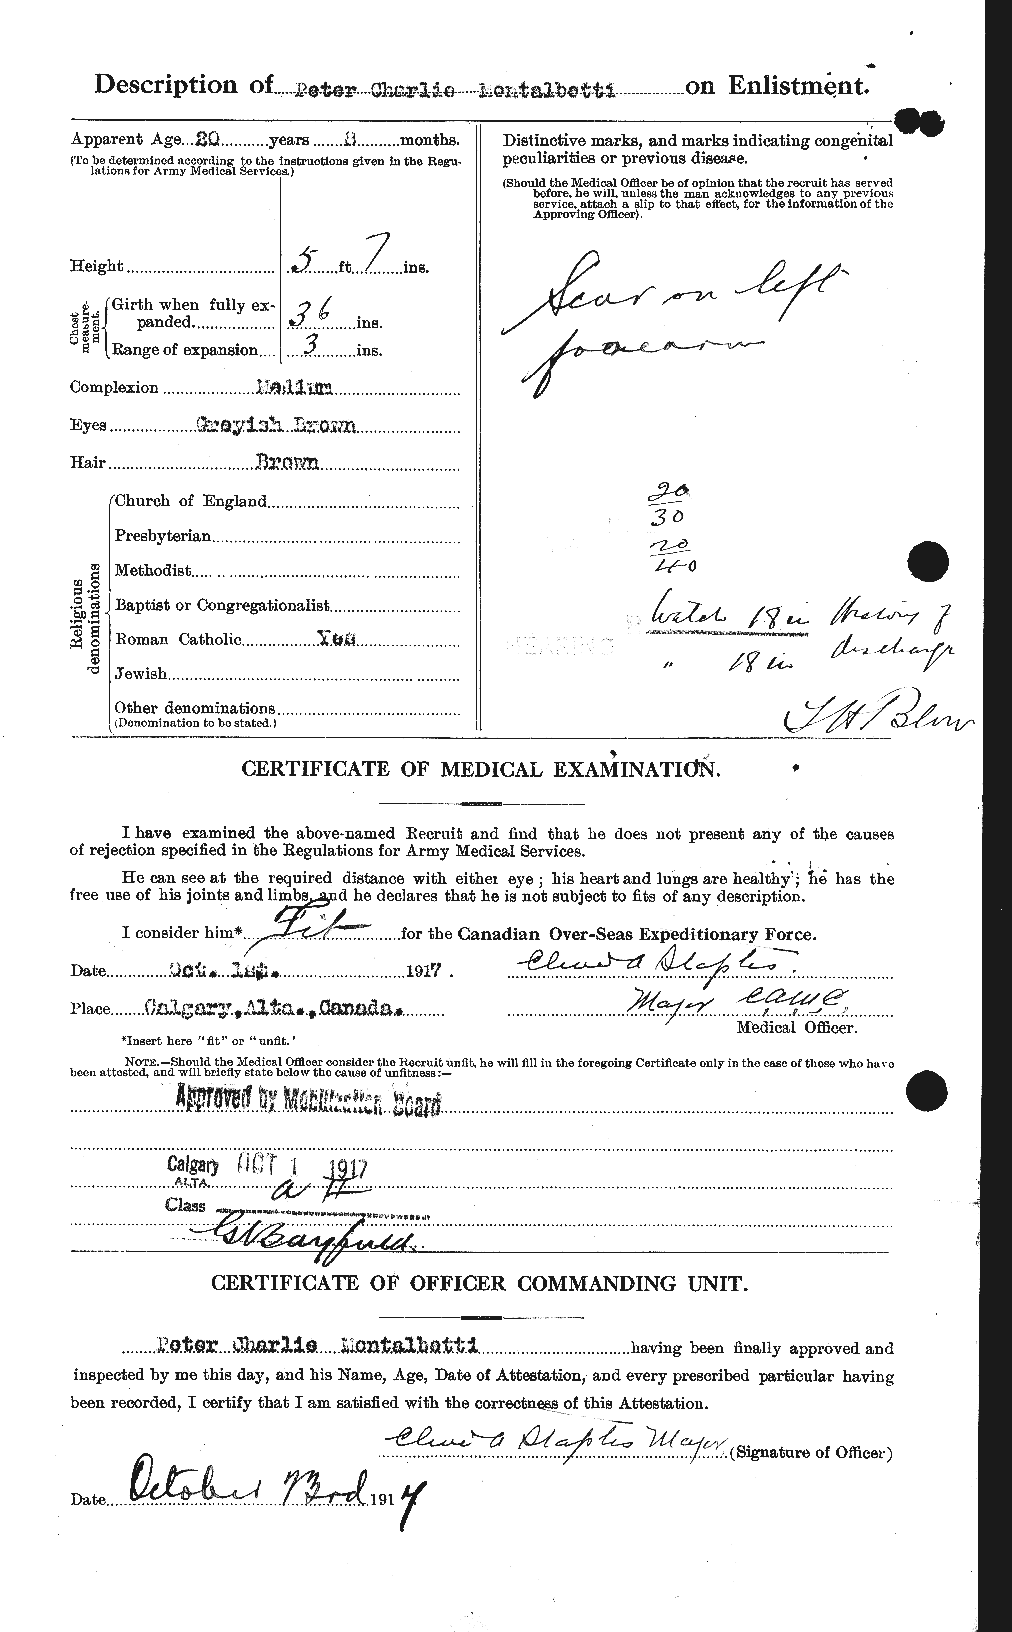 Personnel Records of the First World War - CEF 500197b